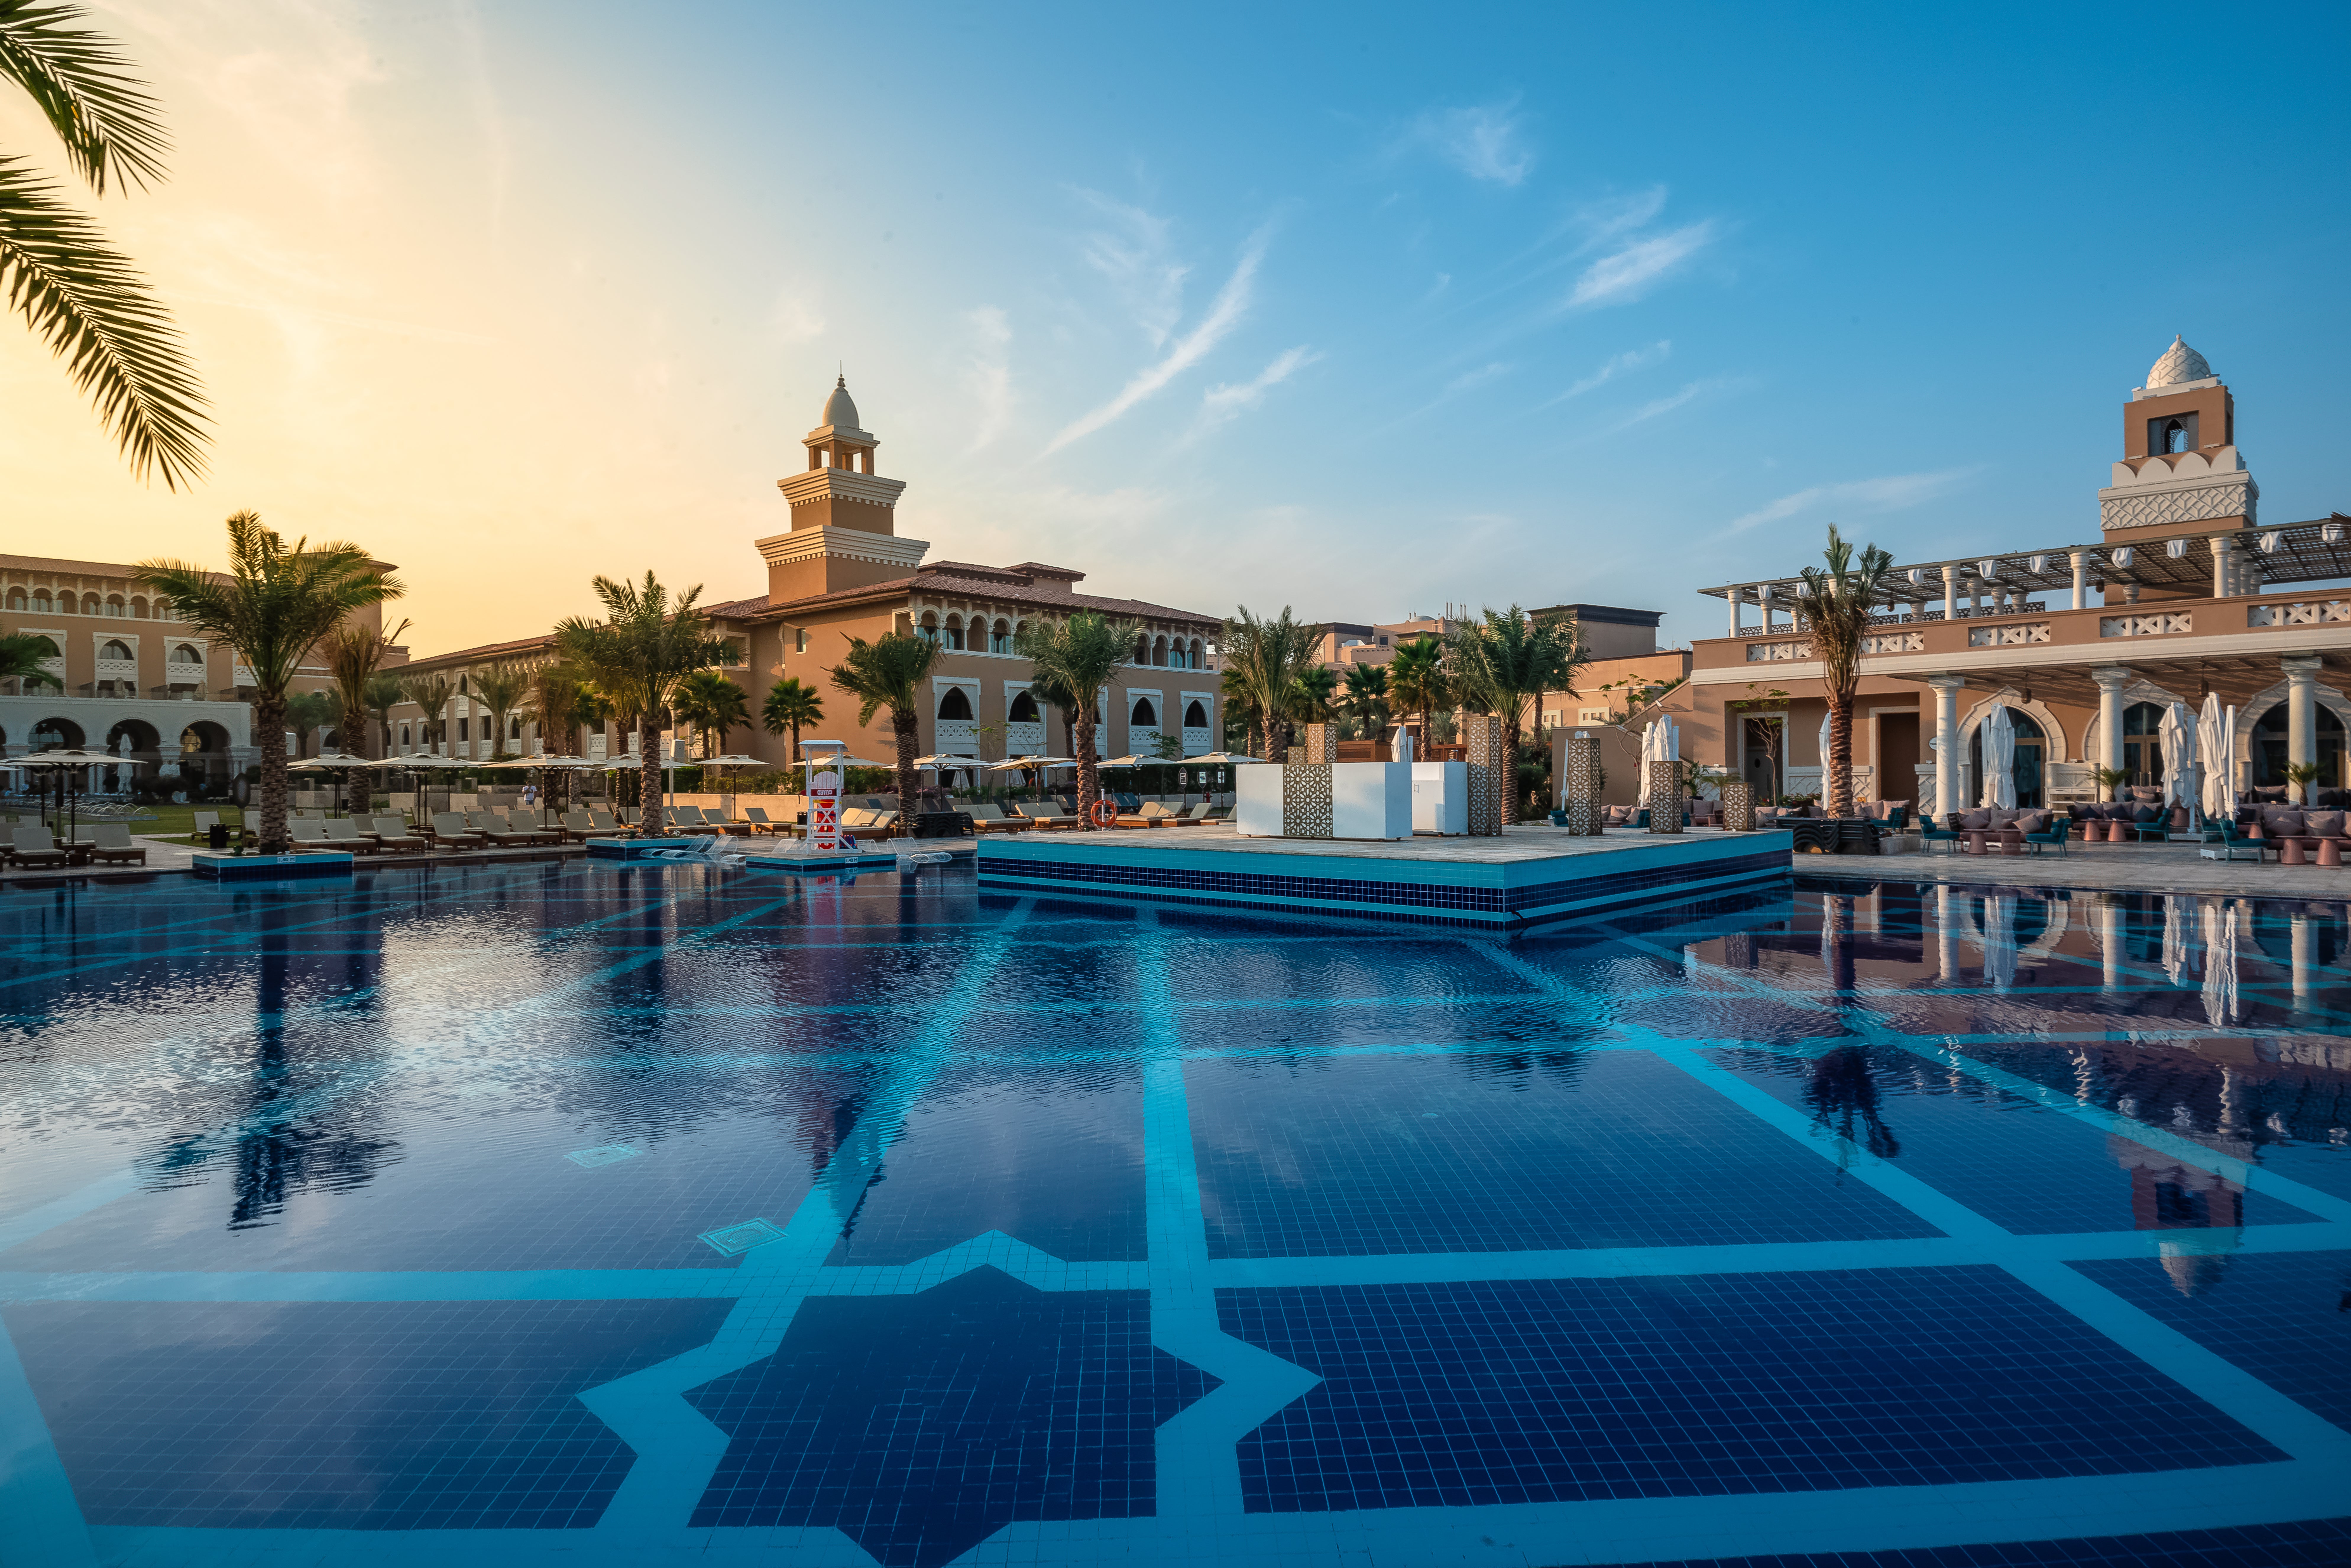 From gorgeous pools to great entertainment, the resort has everything you need